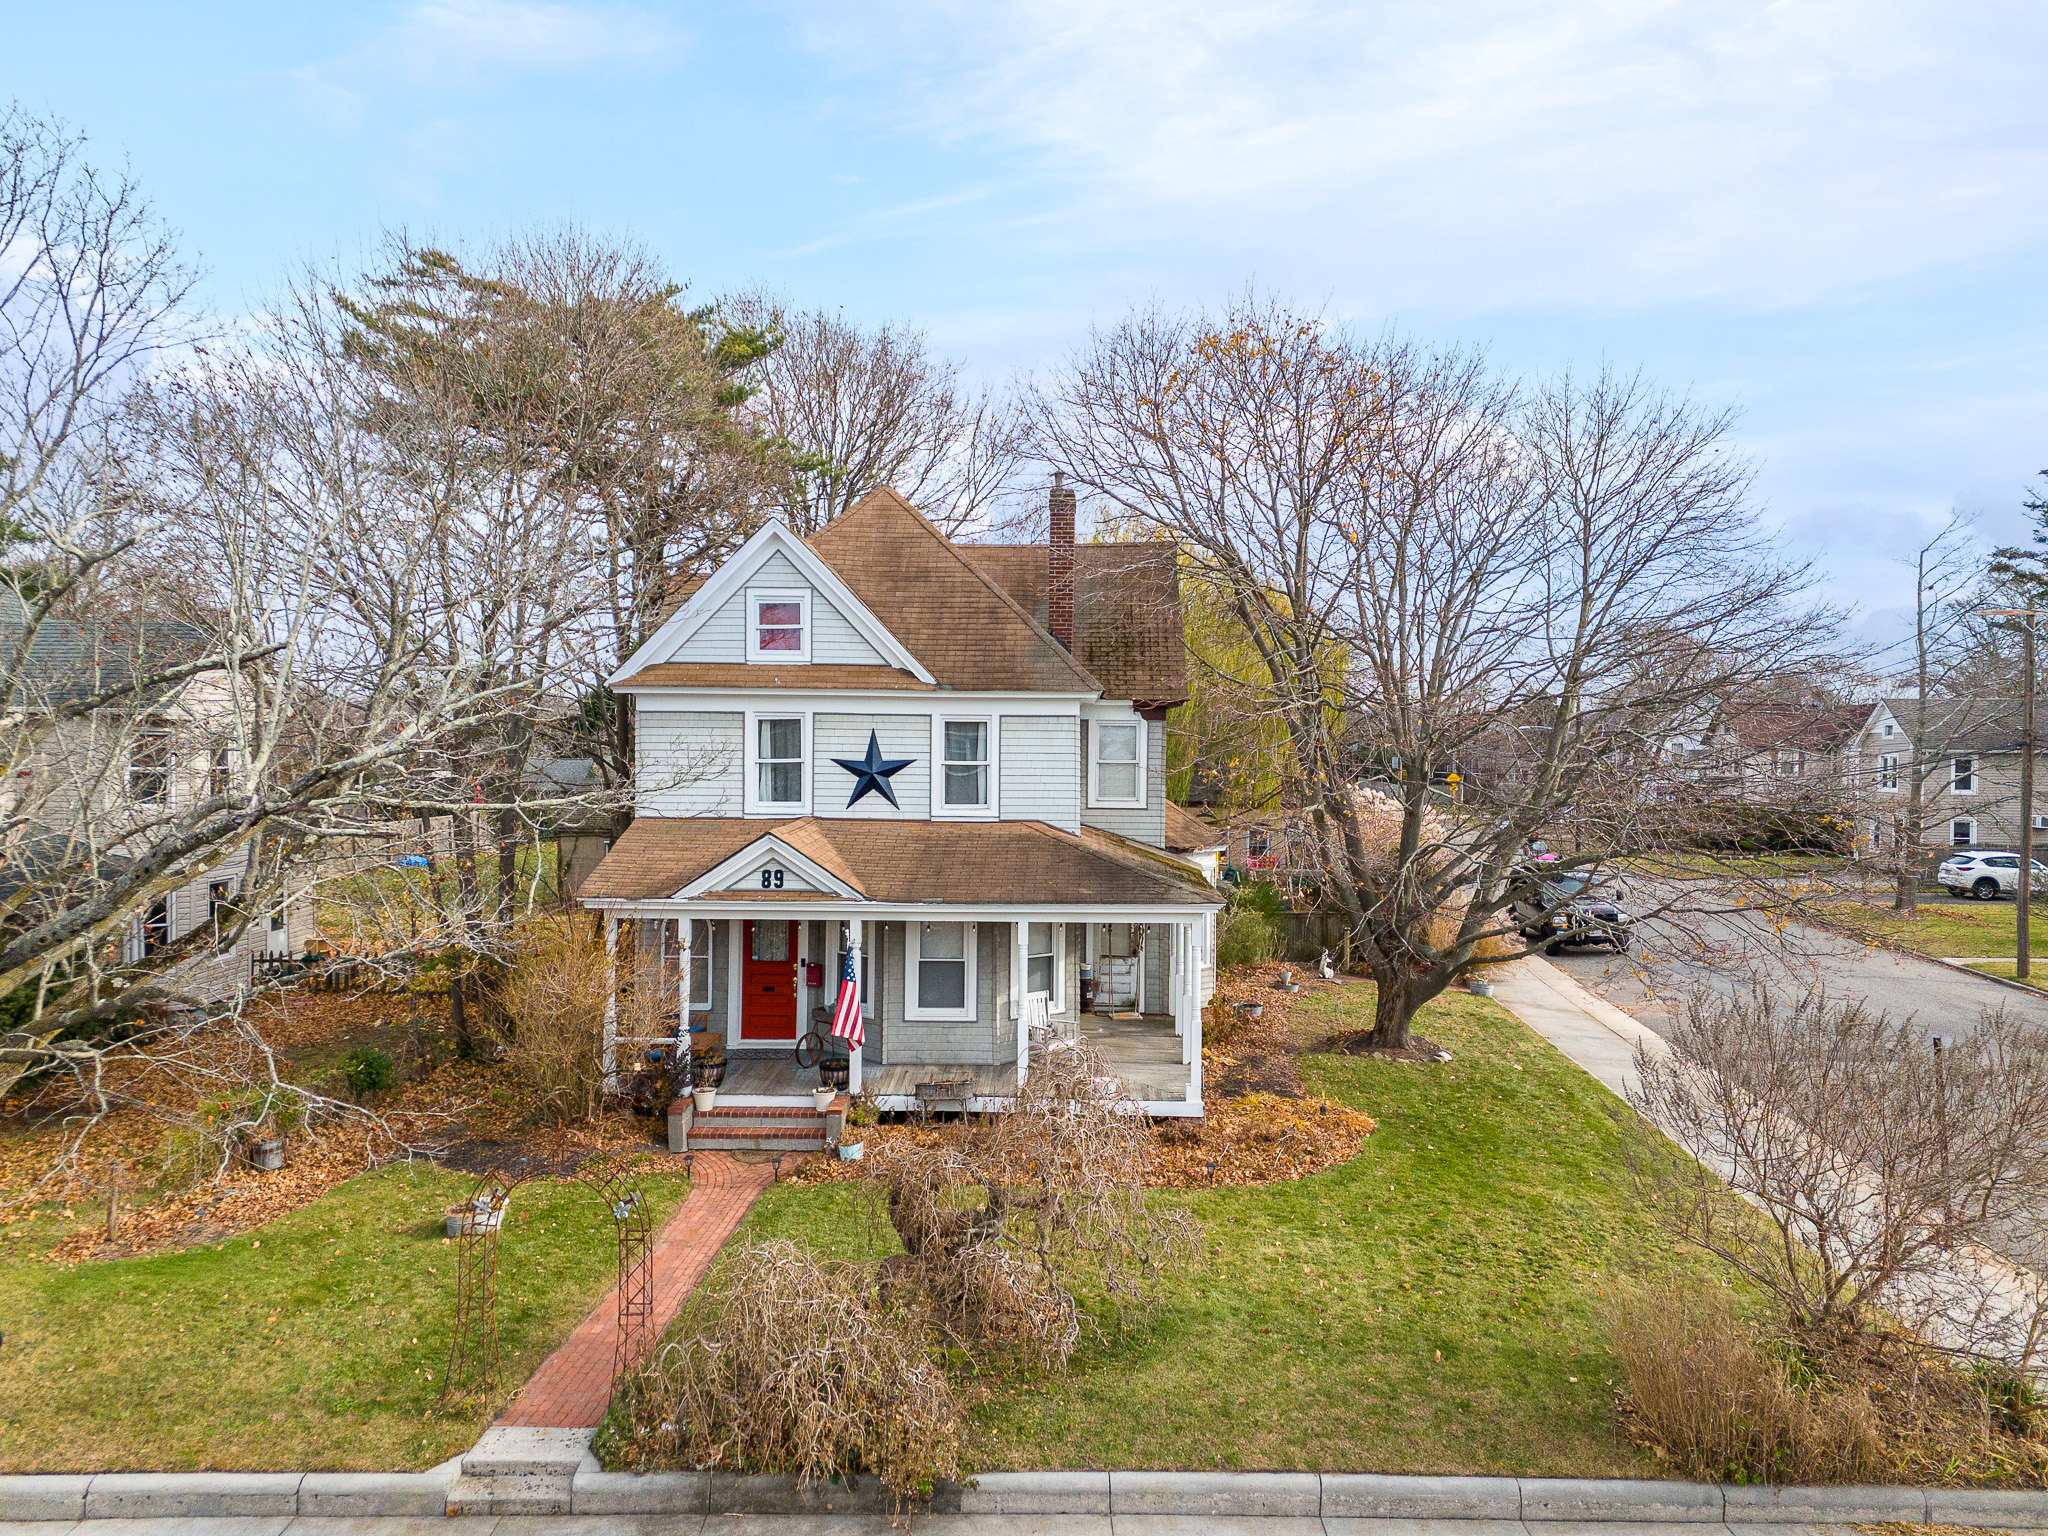 89 Cedar Ave, Patchogue, New York, 11772, United States, 5 Bedrooms Bedrooms, ,2 BathroomsBathrooms,Residential,For Sale,89 Cedar Ave,1411046